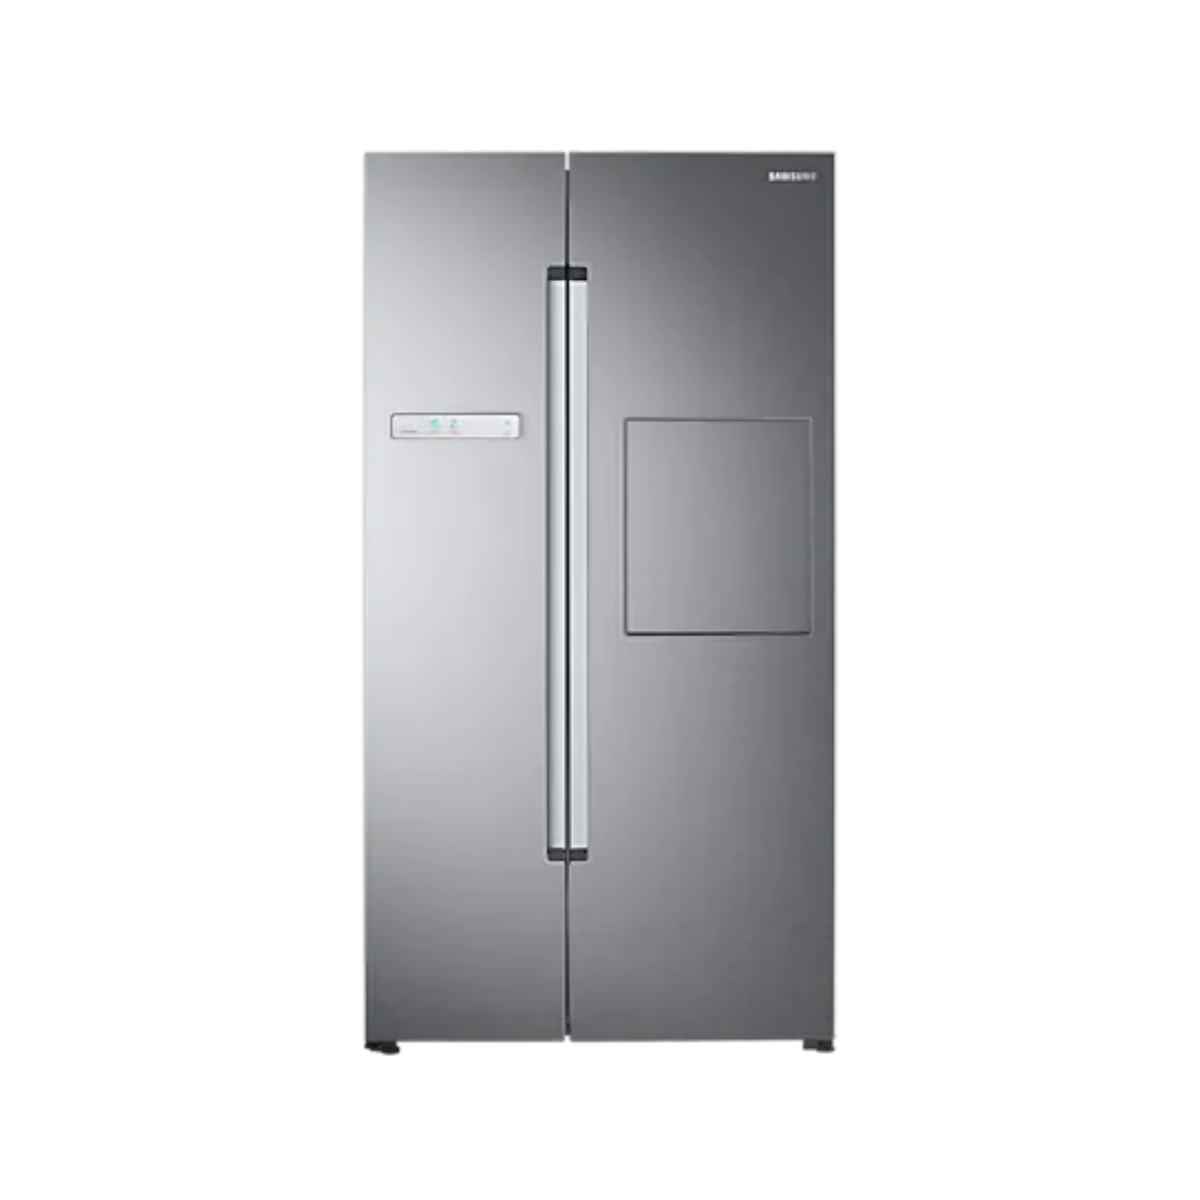 Samsung 845 L Large Capacity Side By Side Refrigerator (RS82A6000SL)